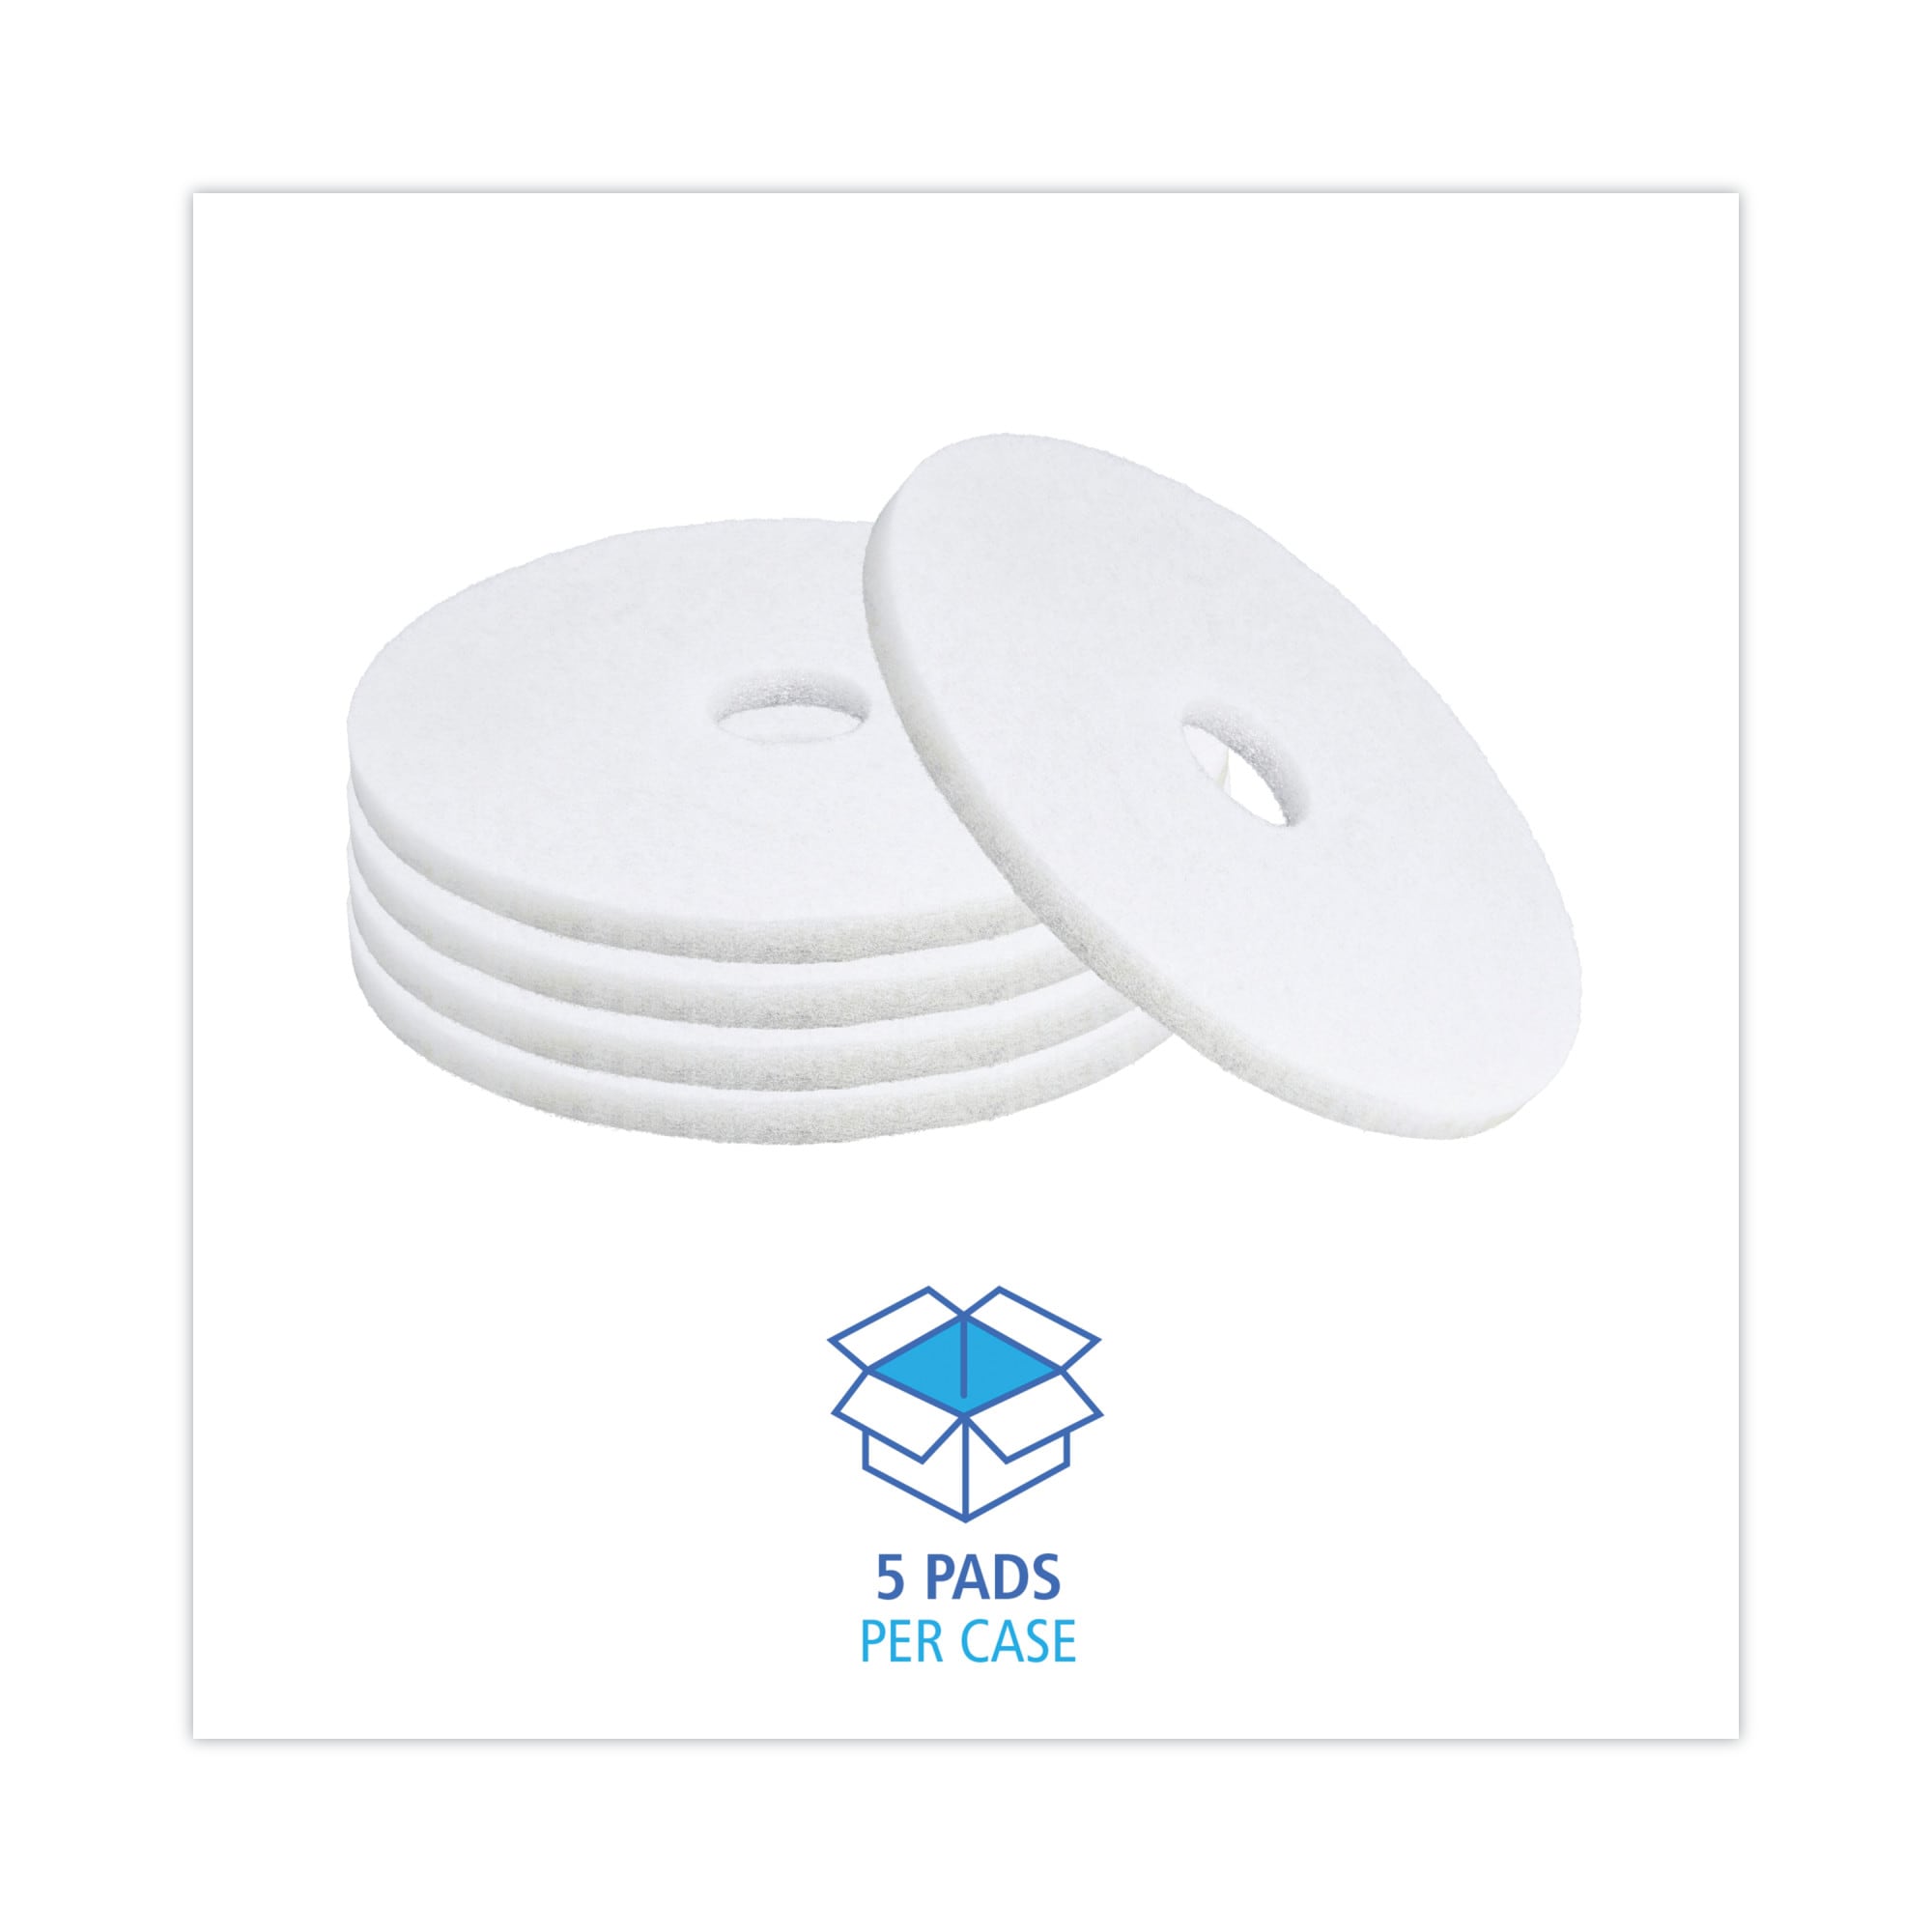 Buffing Pads, Polishing Pads, 3M Floor Buffer Pads in Stock - ULINE